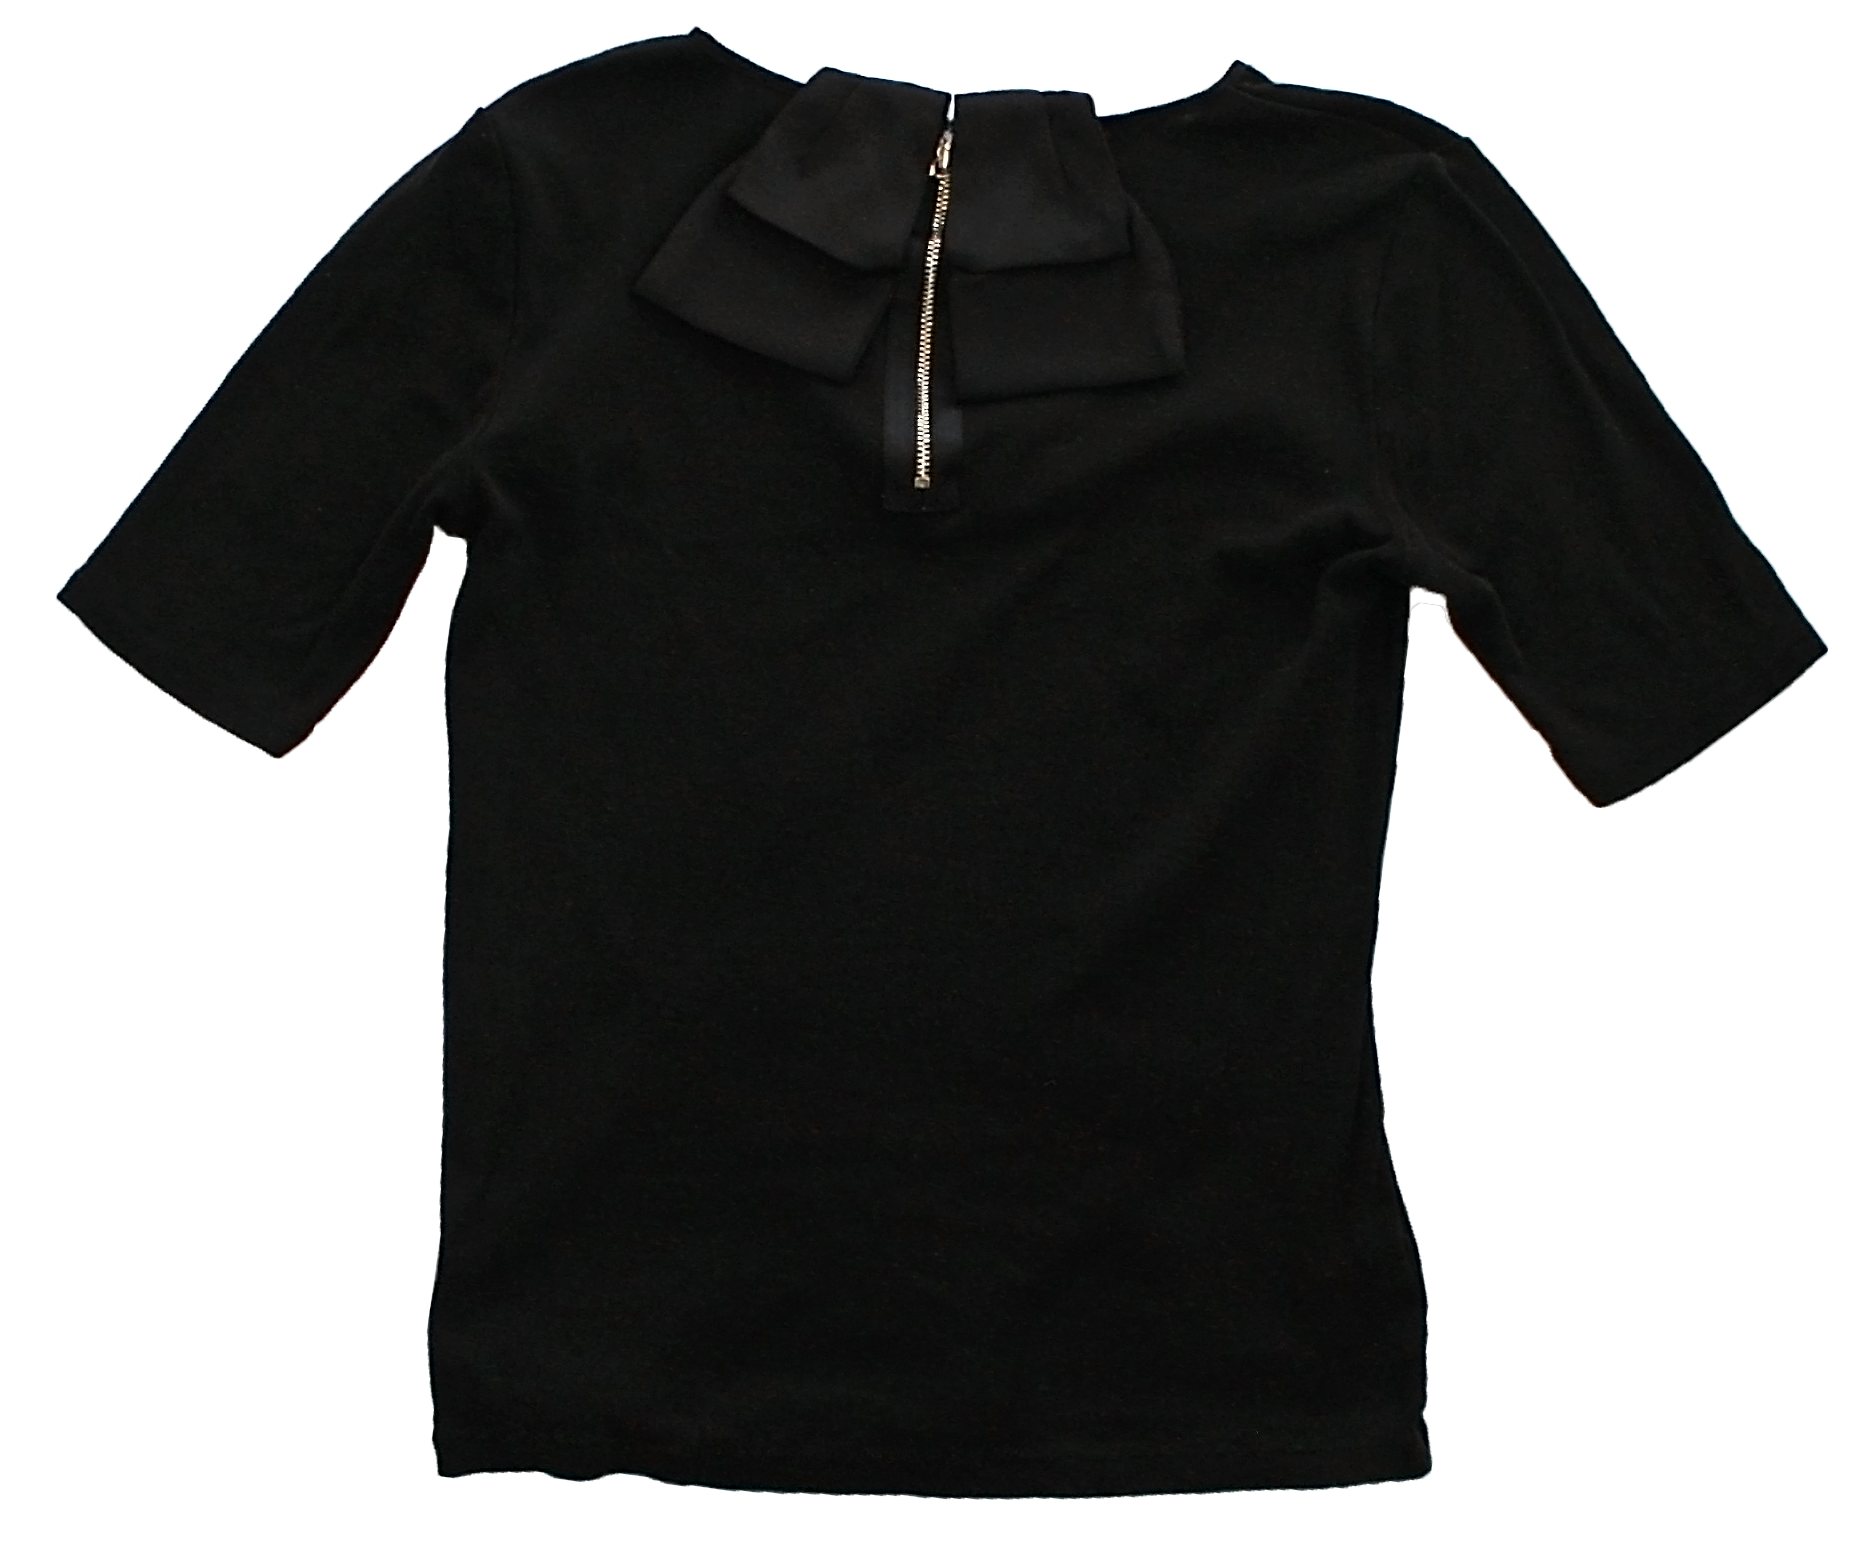 A black tee with a bow and zipper at the neck